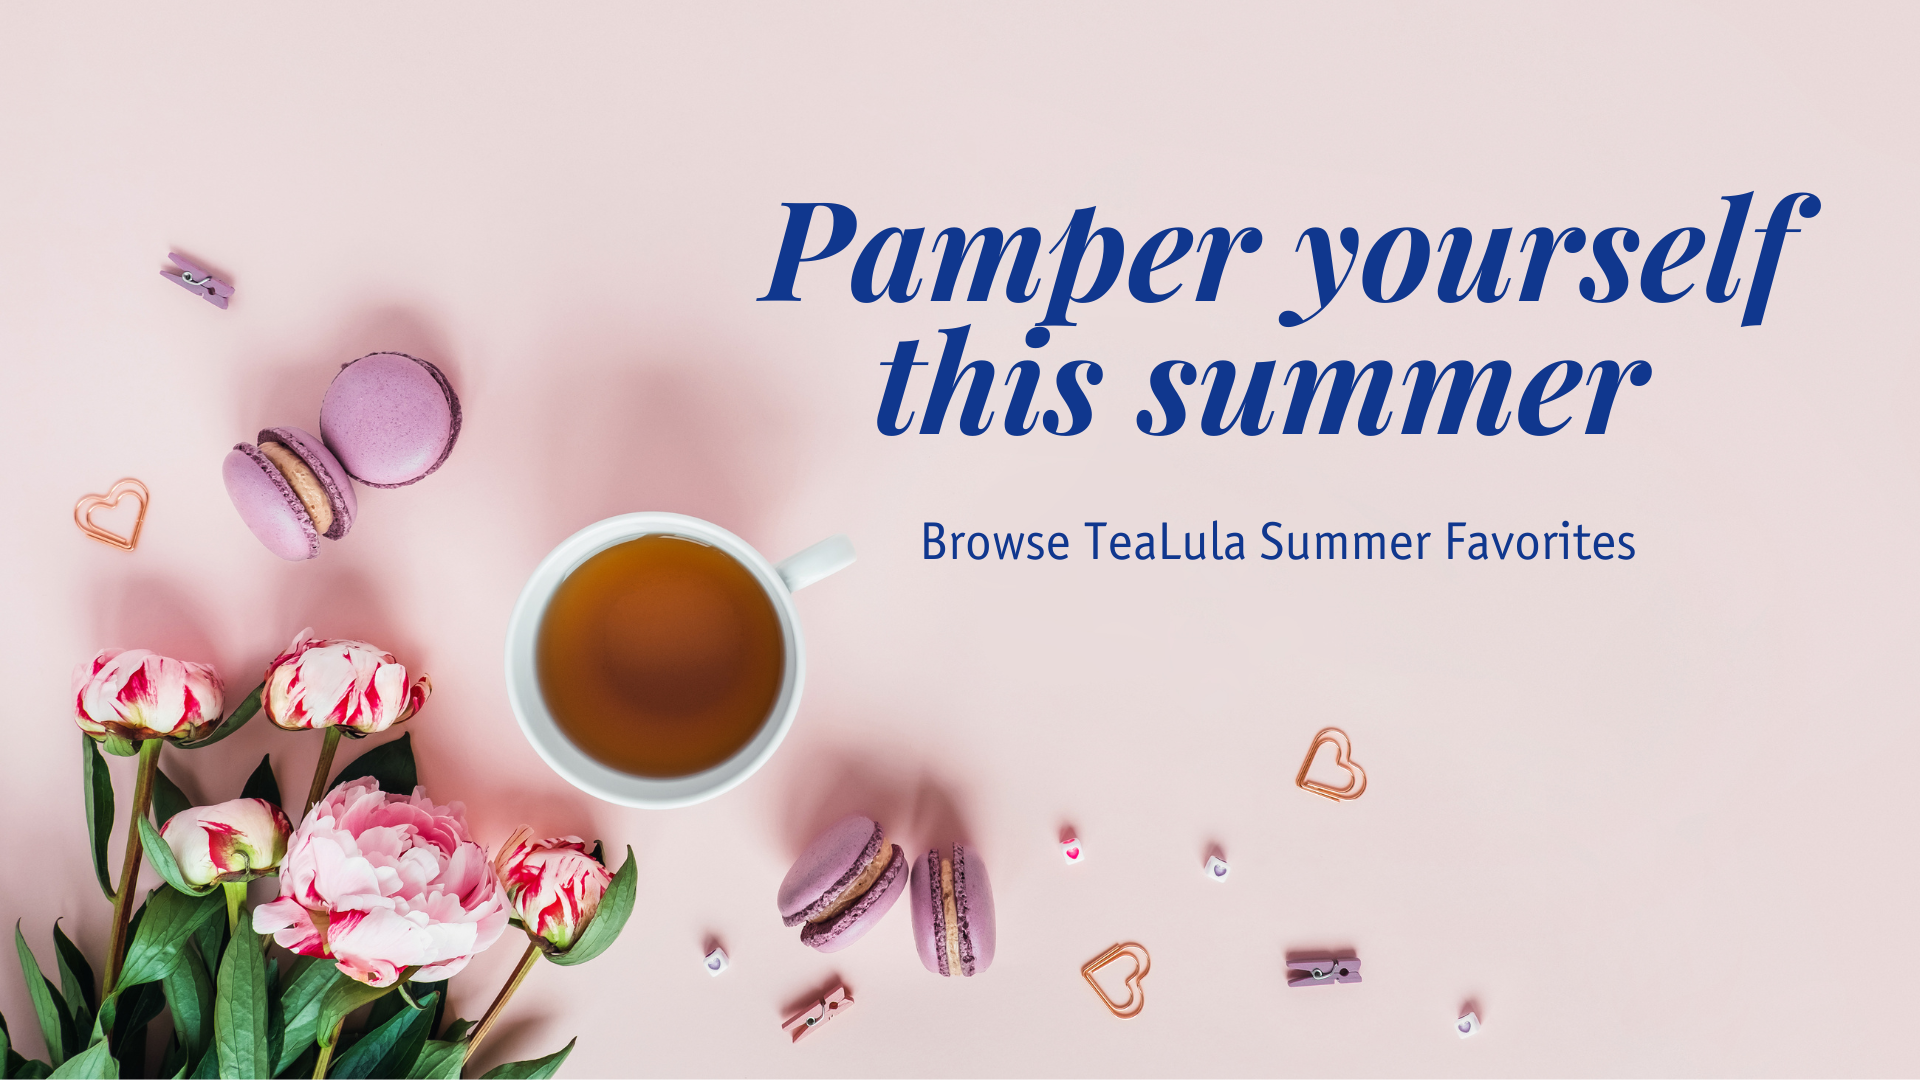 TeaLula in Park Ridge Illinois serves loose leaf tea beverages to order and offers afternoon tea service by reservation. Explore over 150 tea blends and sample teas in store or online. Great spot for looking for things to do in the Chicago Suburbs.